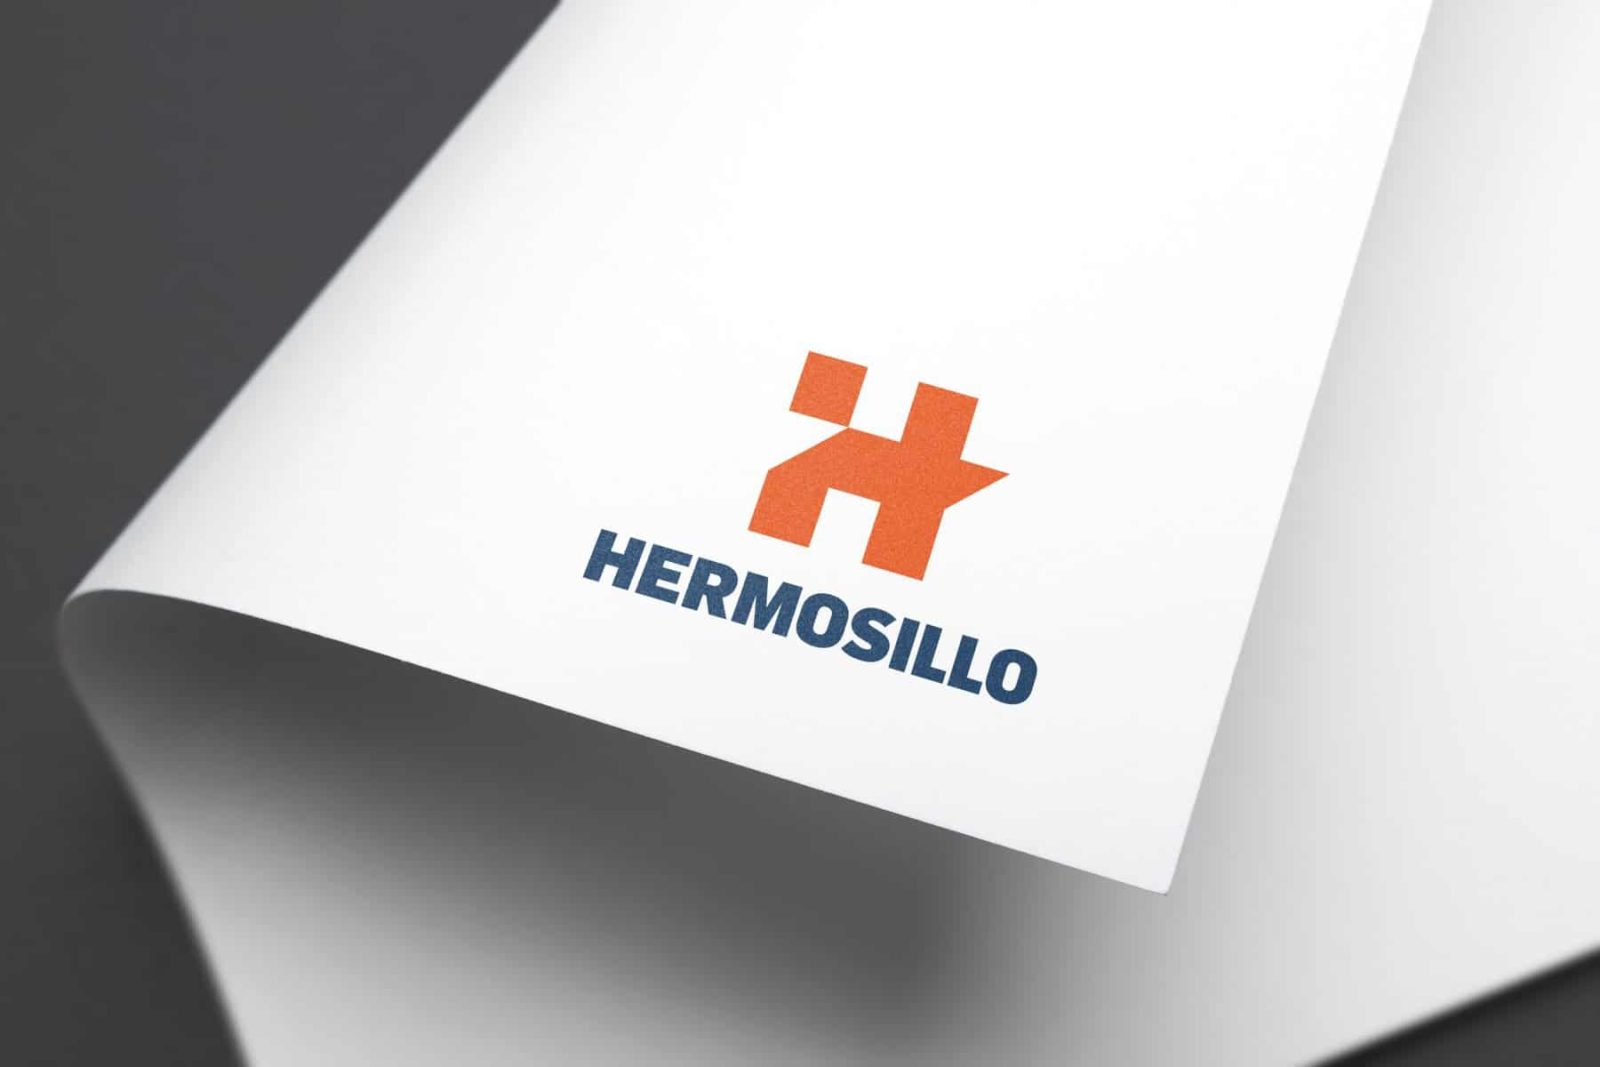 On-page mock-up of Hermosillo new logo